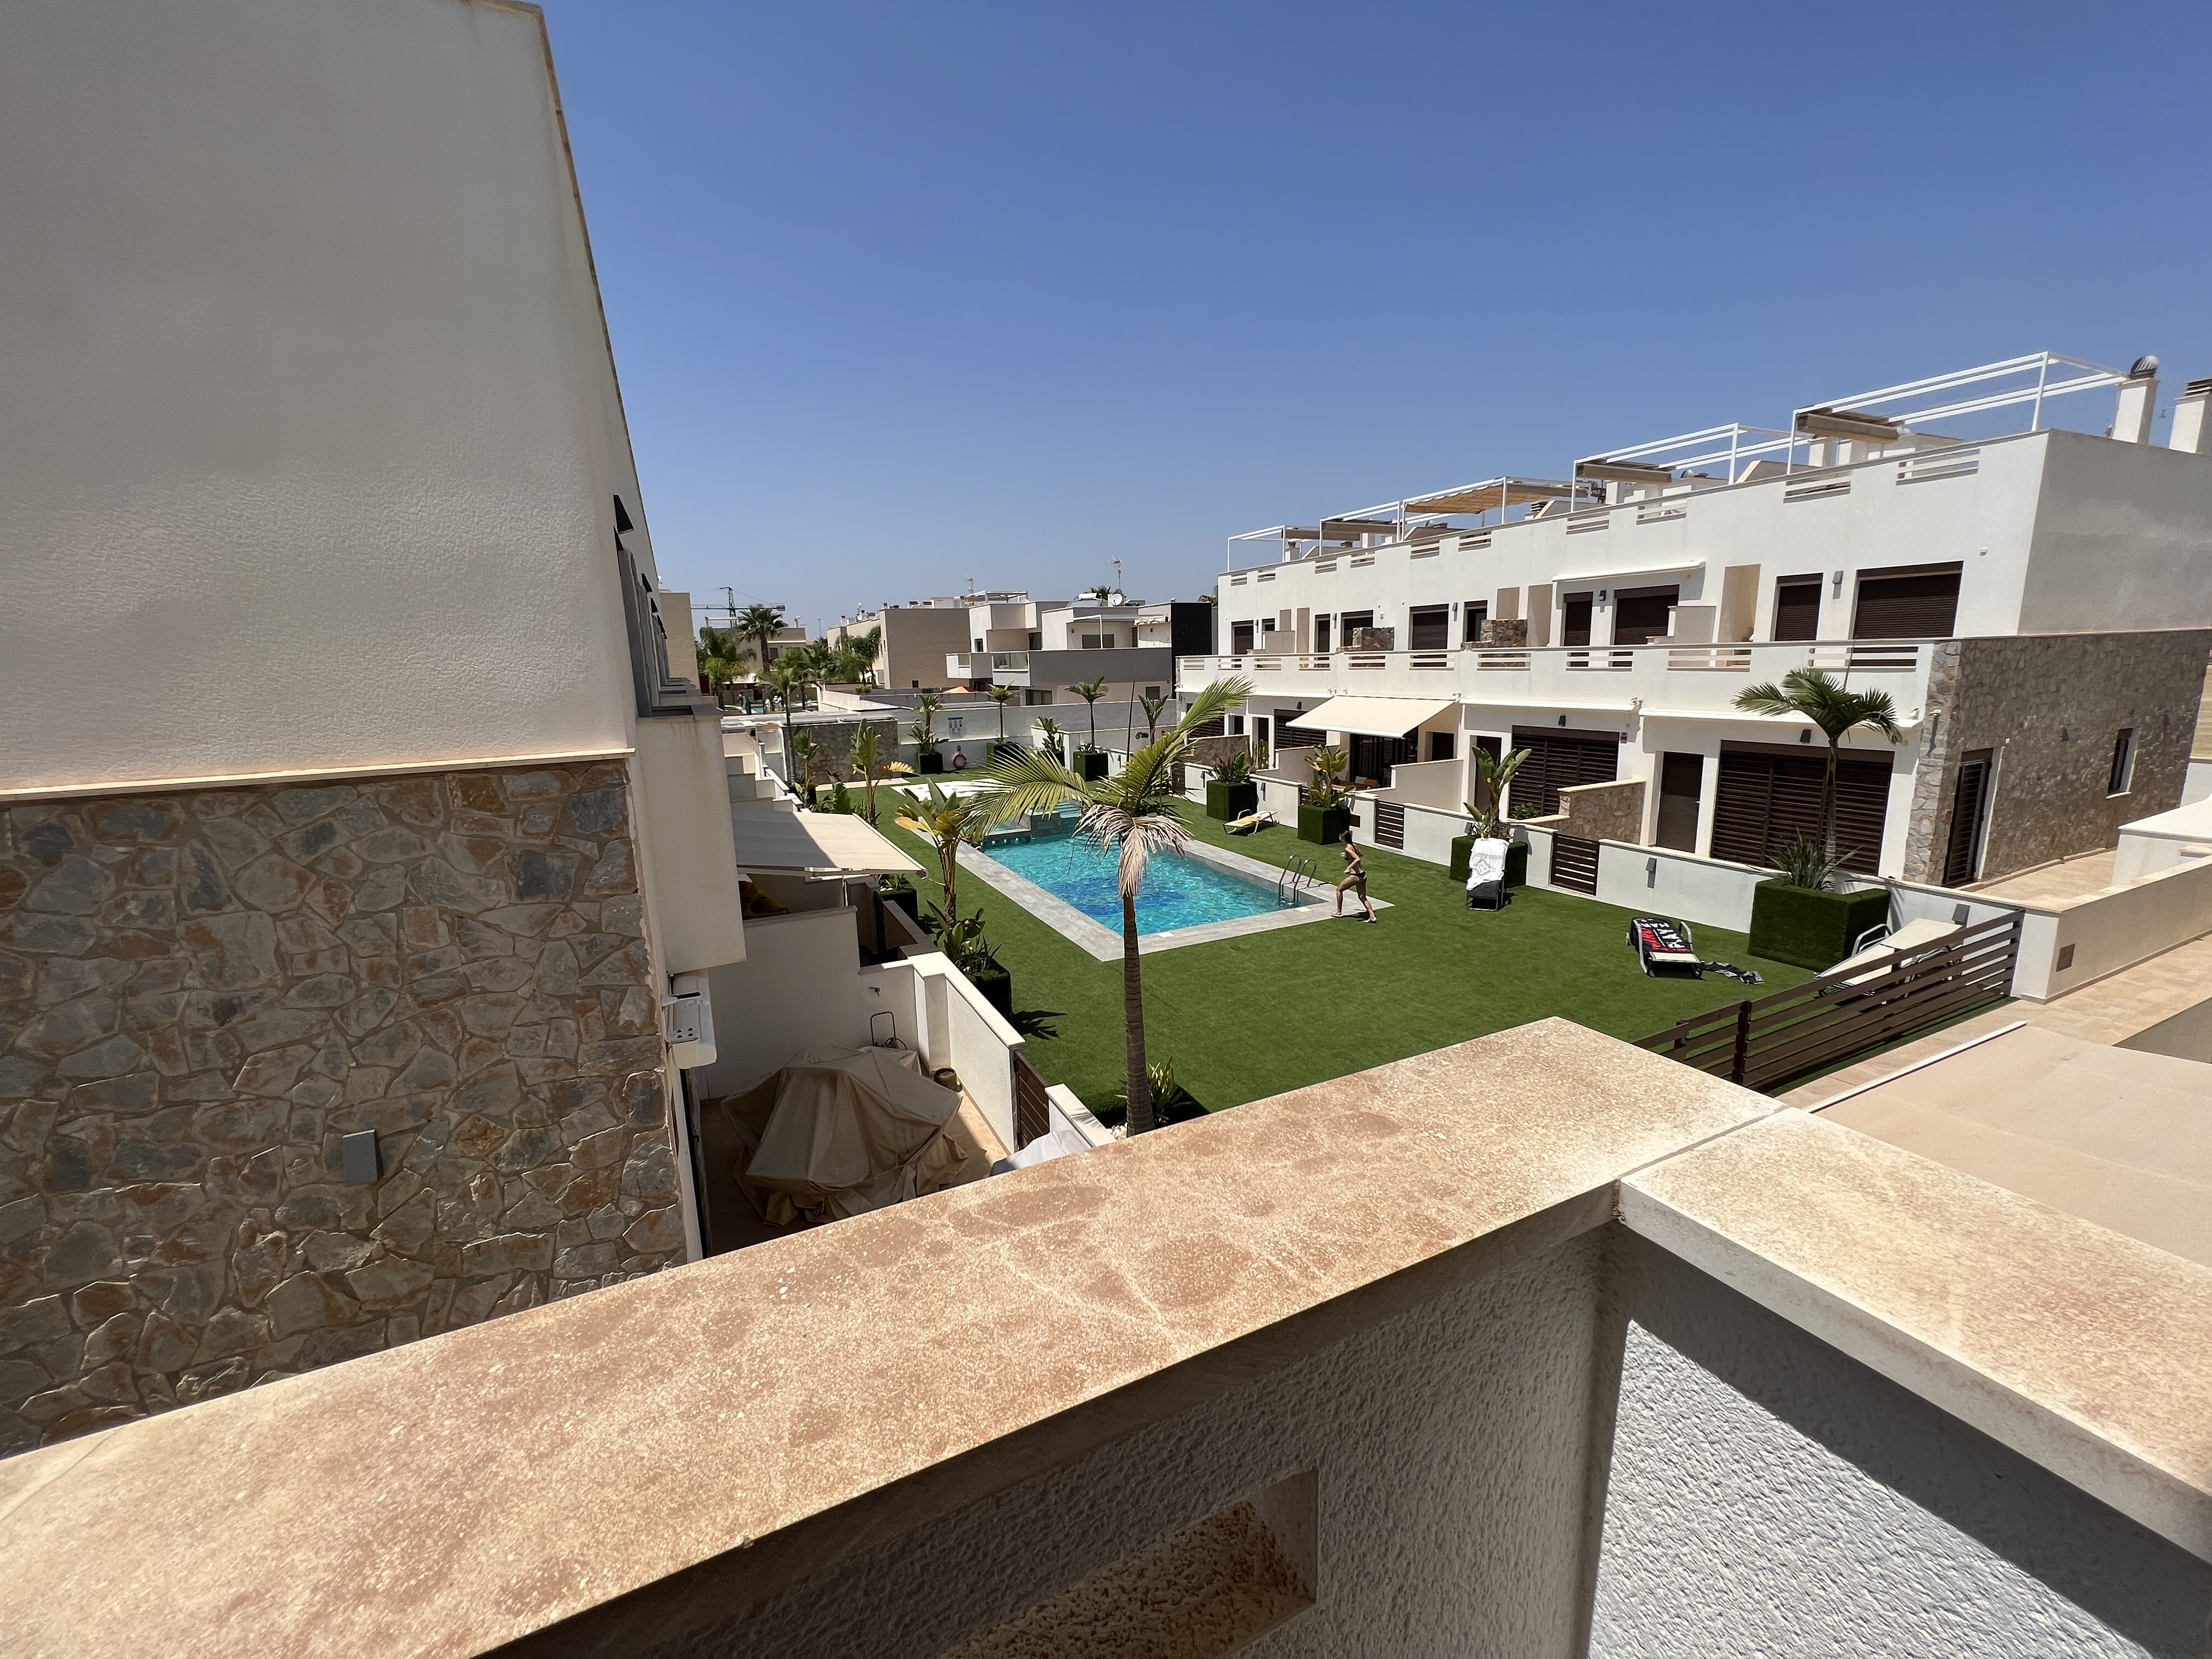 3 BED MODERN TOWNHOUSE ONLY 250 M TO THE BEACH,TORRE DE LA HORADADA